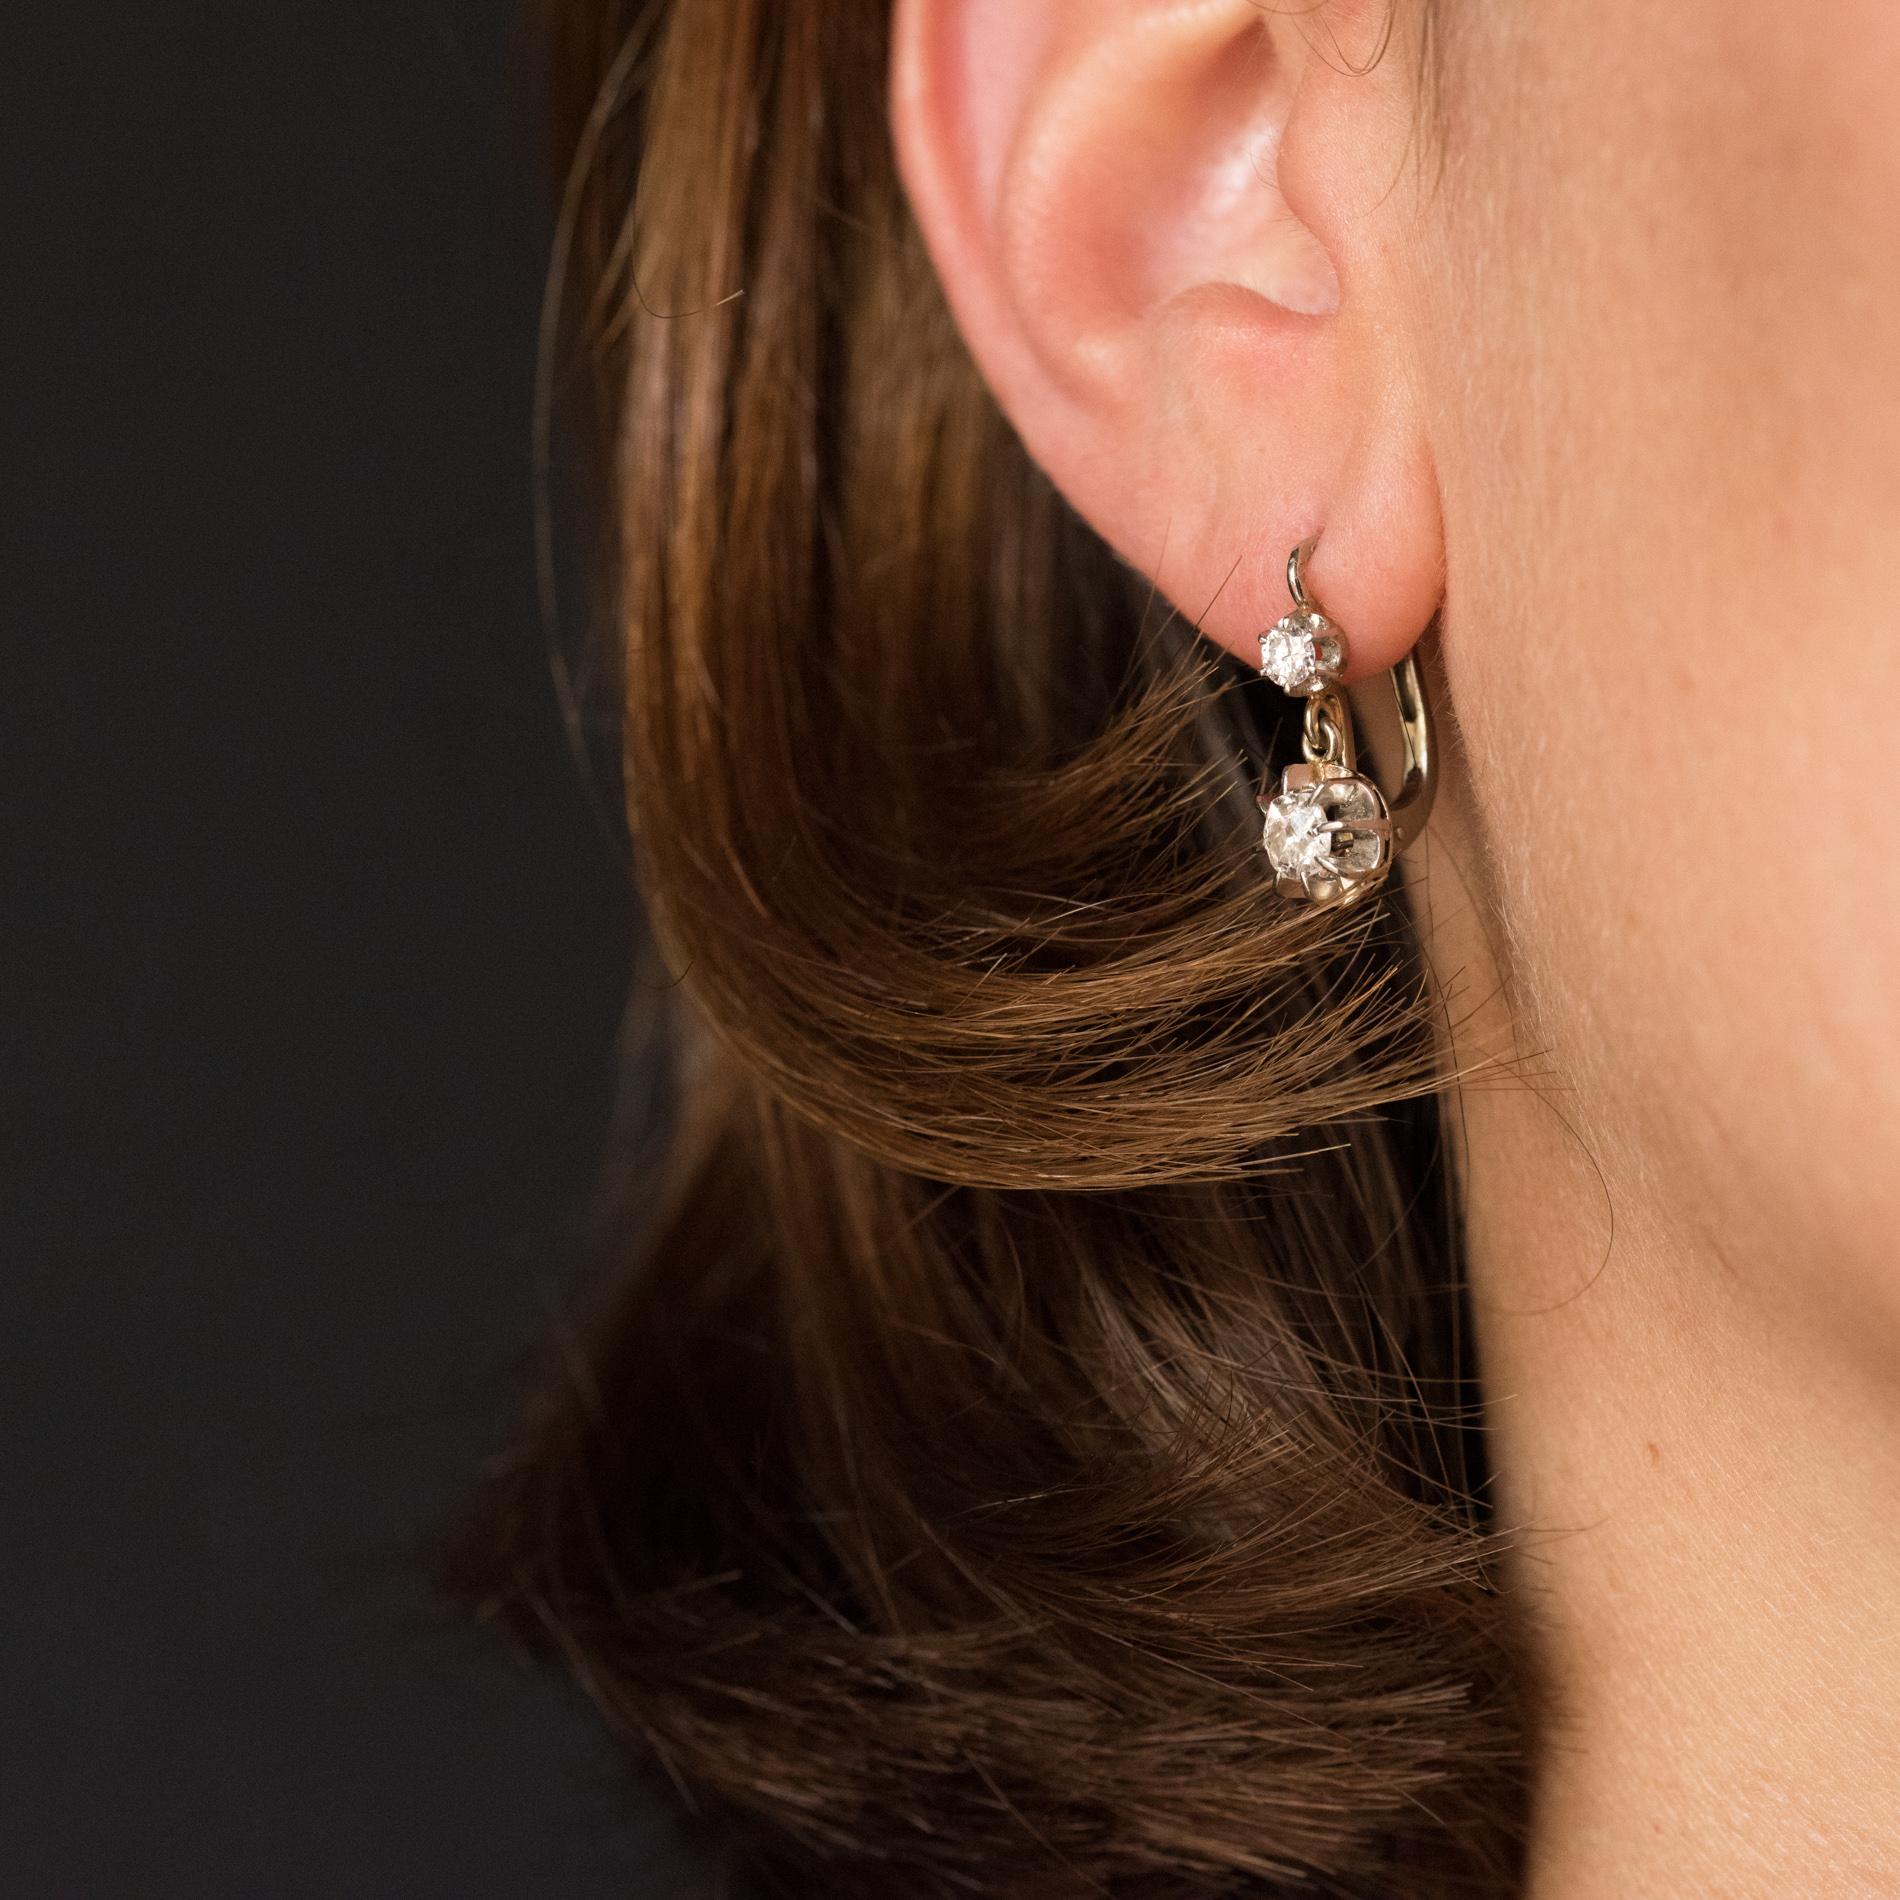 Earrings in 18 karats white gold, eagle's head hallmark.
Each antique lever- back earring is adorned with a brilliant- cut diamond that holds an antique cushion- cut diamond. The clasp is from the front.
Total weight of diamonds: 0.50 carat